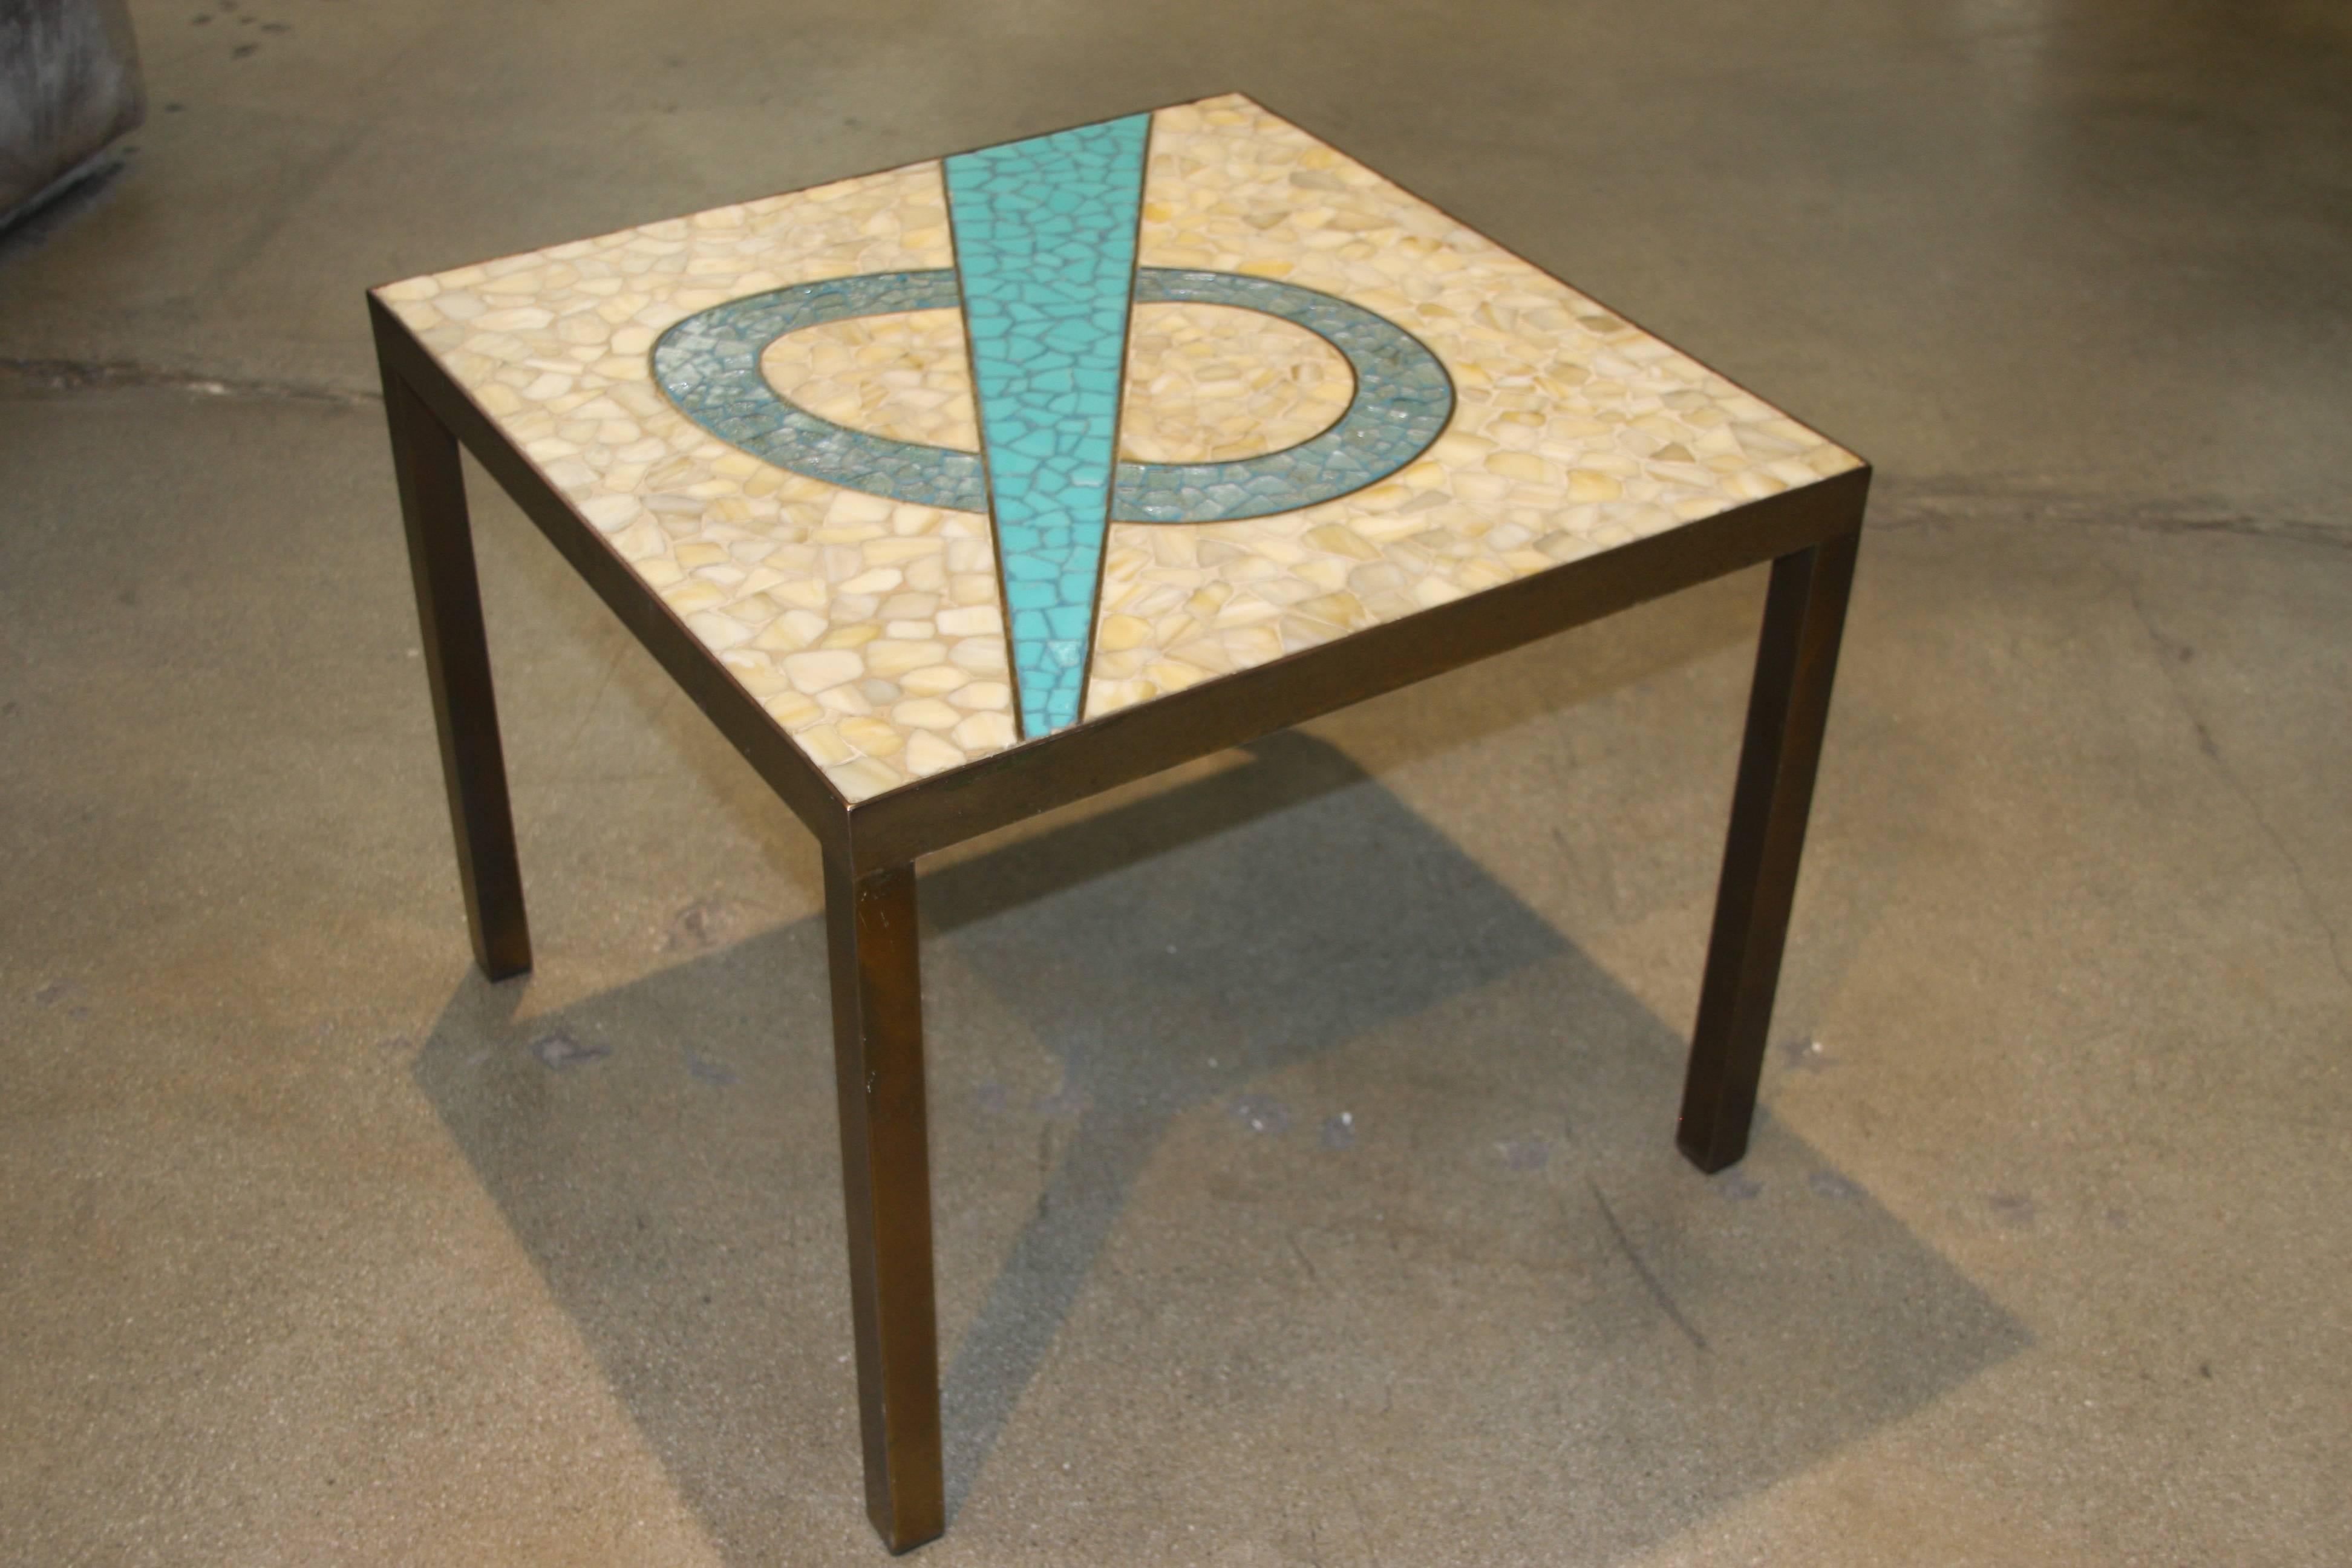 A very nice little table with a inset tile top and a bronze patinated frame. Nice design to the tile top.